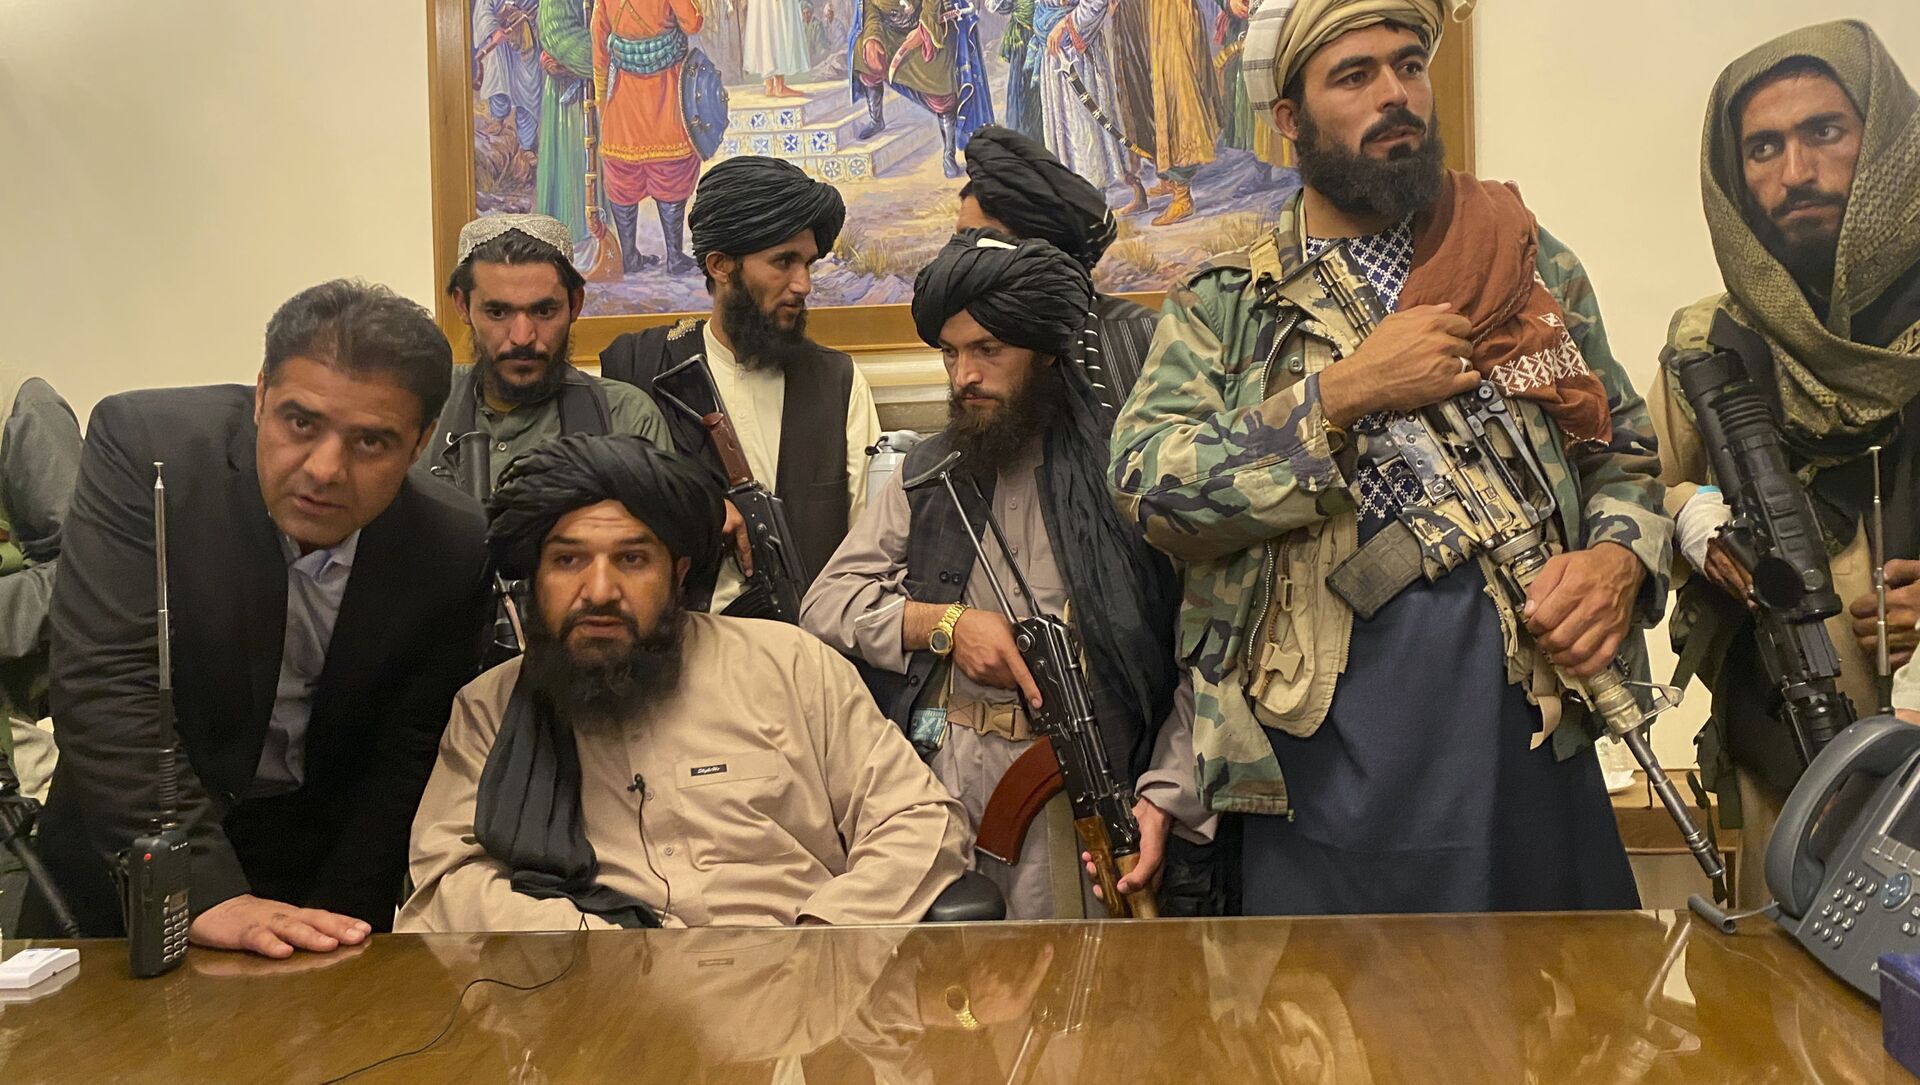 Taliban fighters take control of Afghan presidential palace after the Afghan President Ashraf Ghani fled the country, in Kabul, Afghanistan, Sunday, Aug. 15, 2021. - Sputnik International, 1920, 18.08.2021